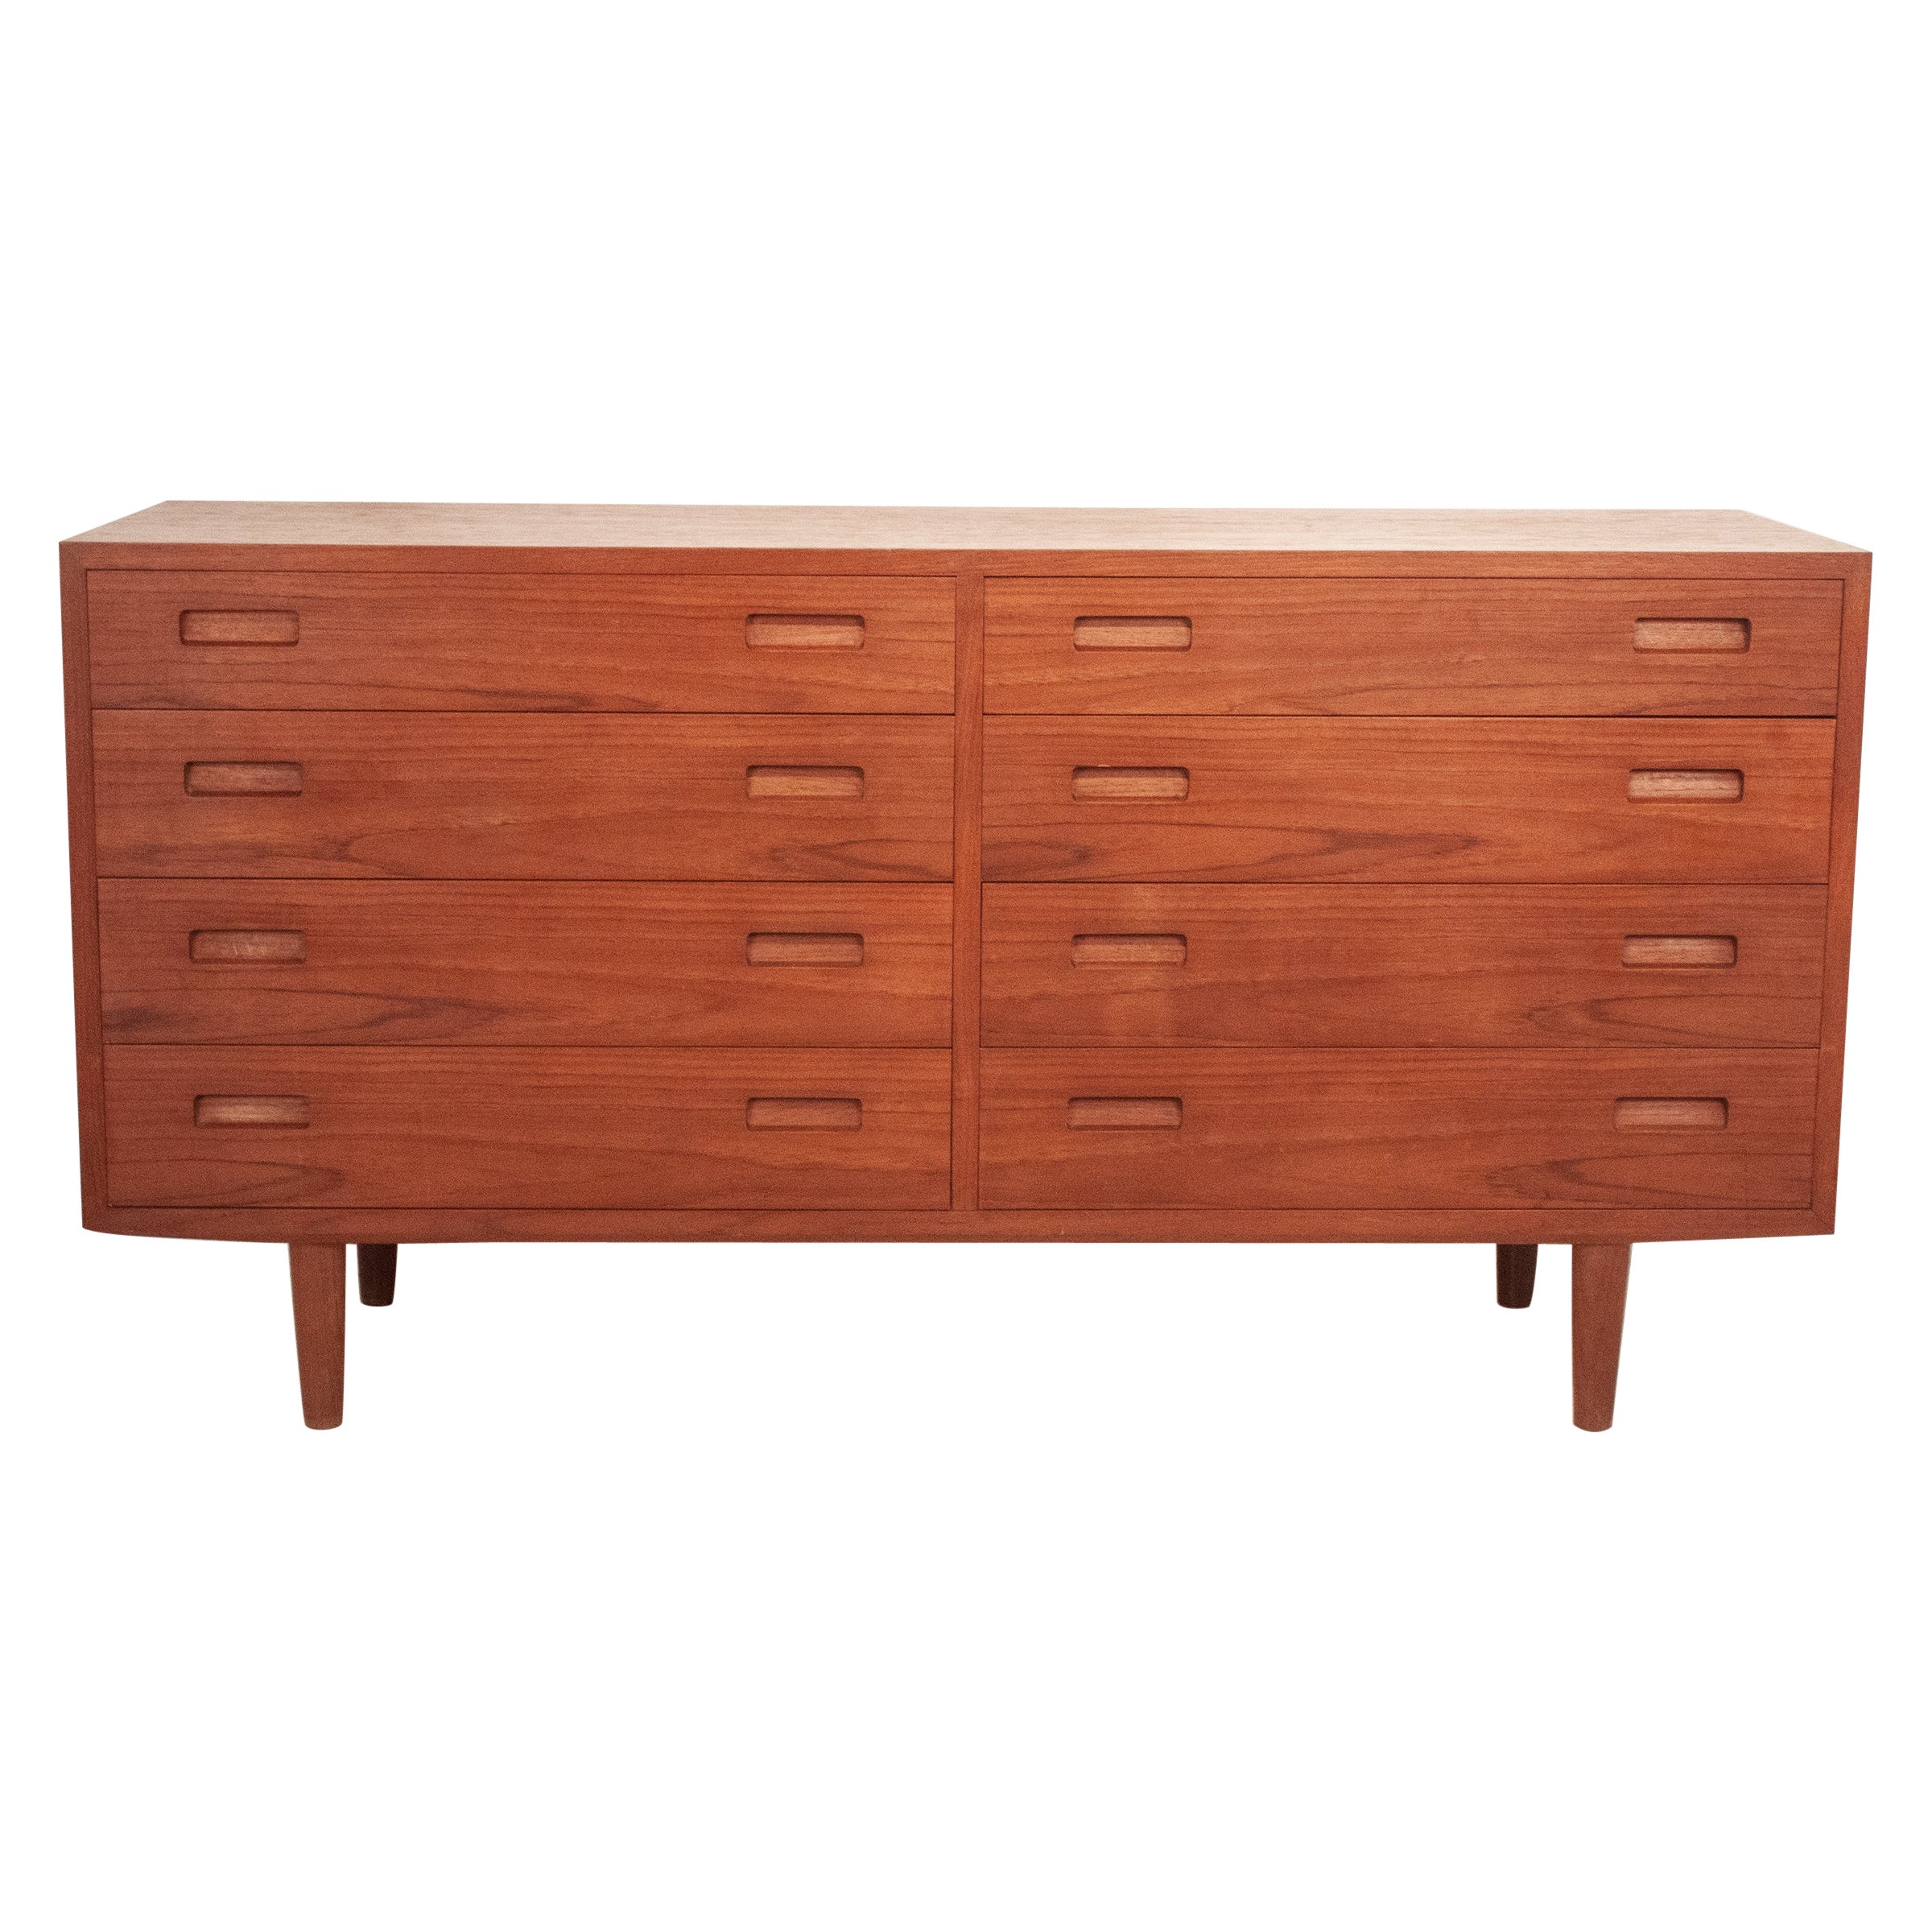 Danish Chest of Drawers Teak Wood by Carlo Jensen for Hundevad, 1950s For Sale